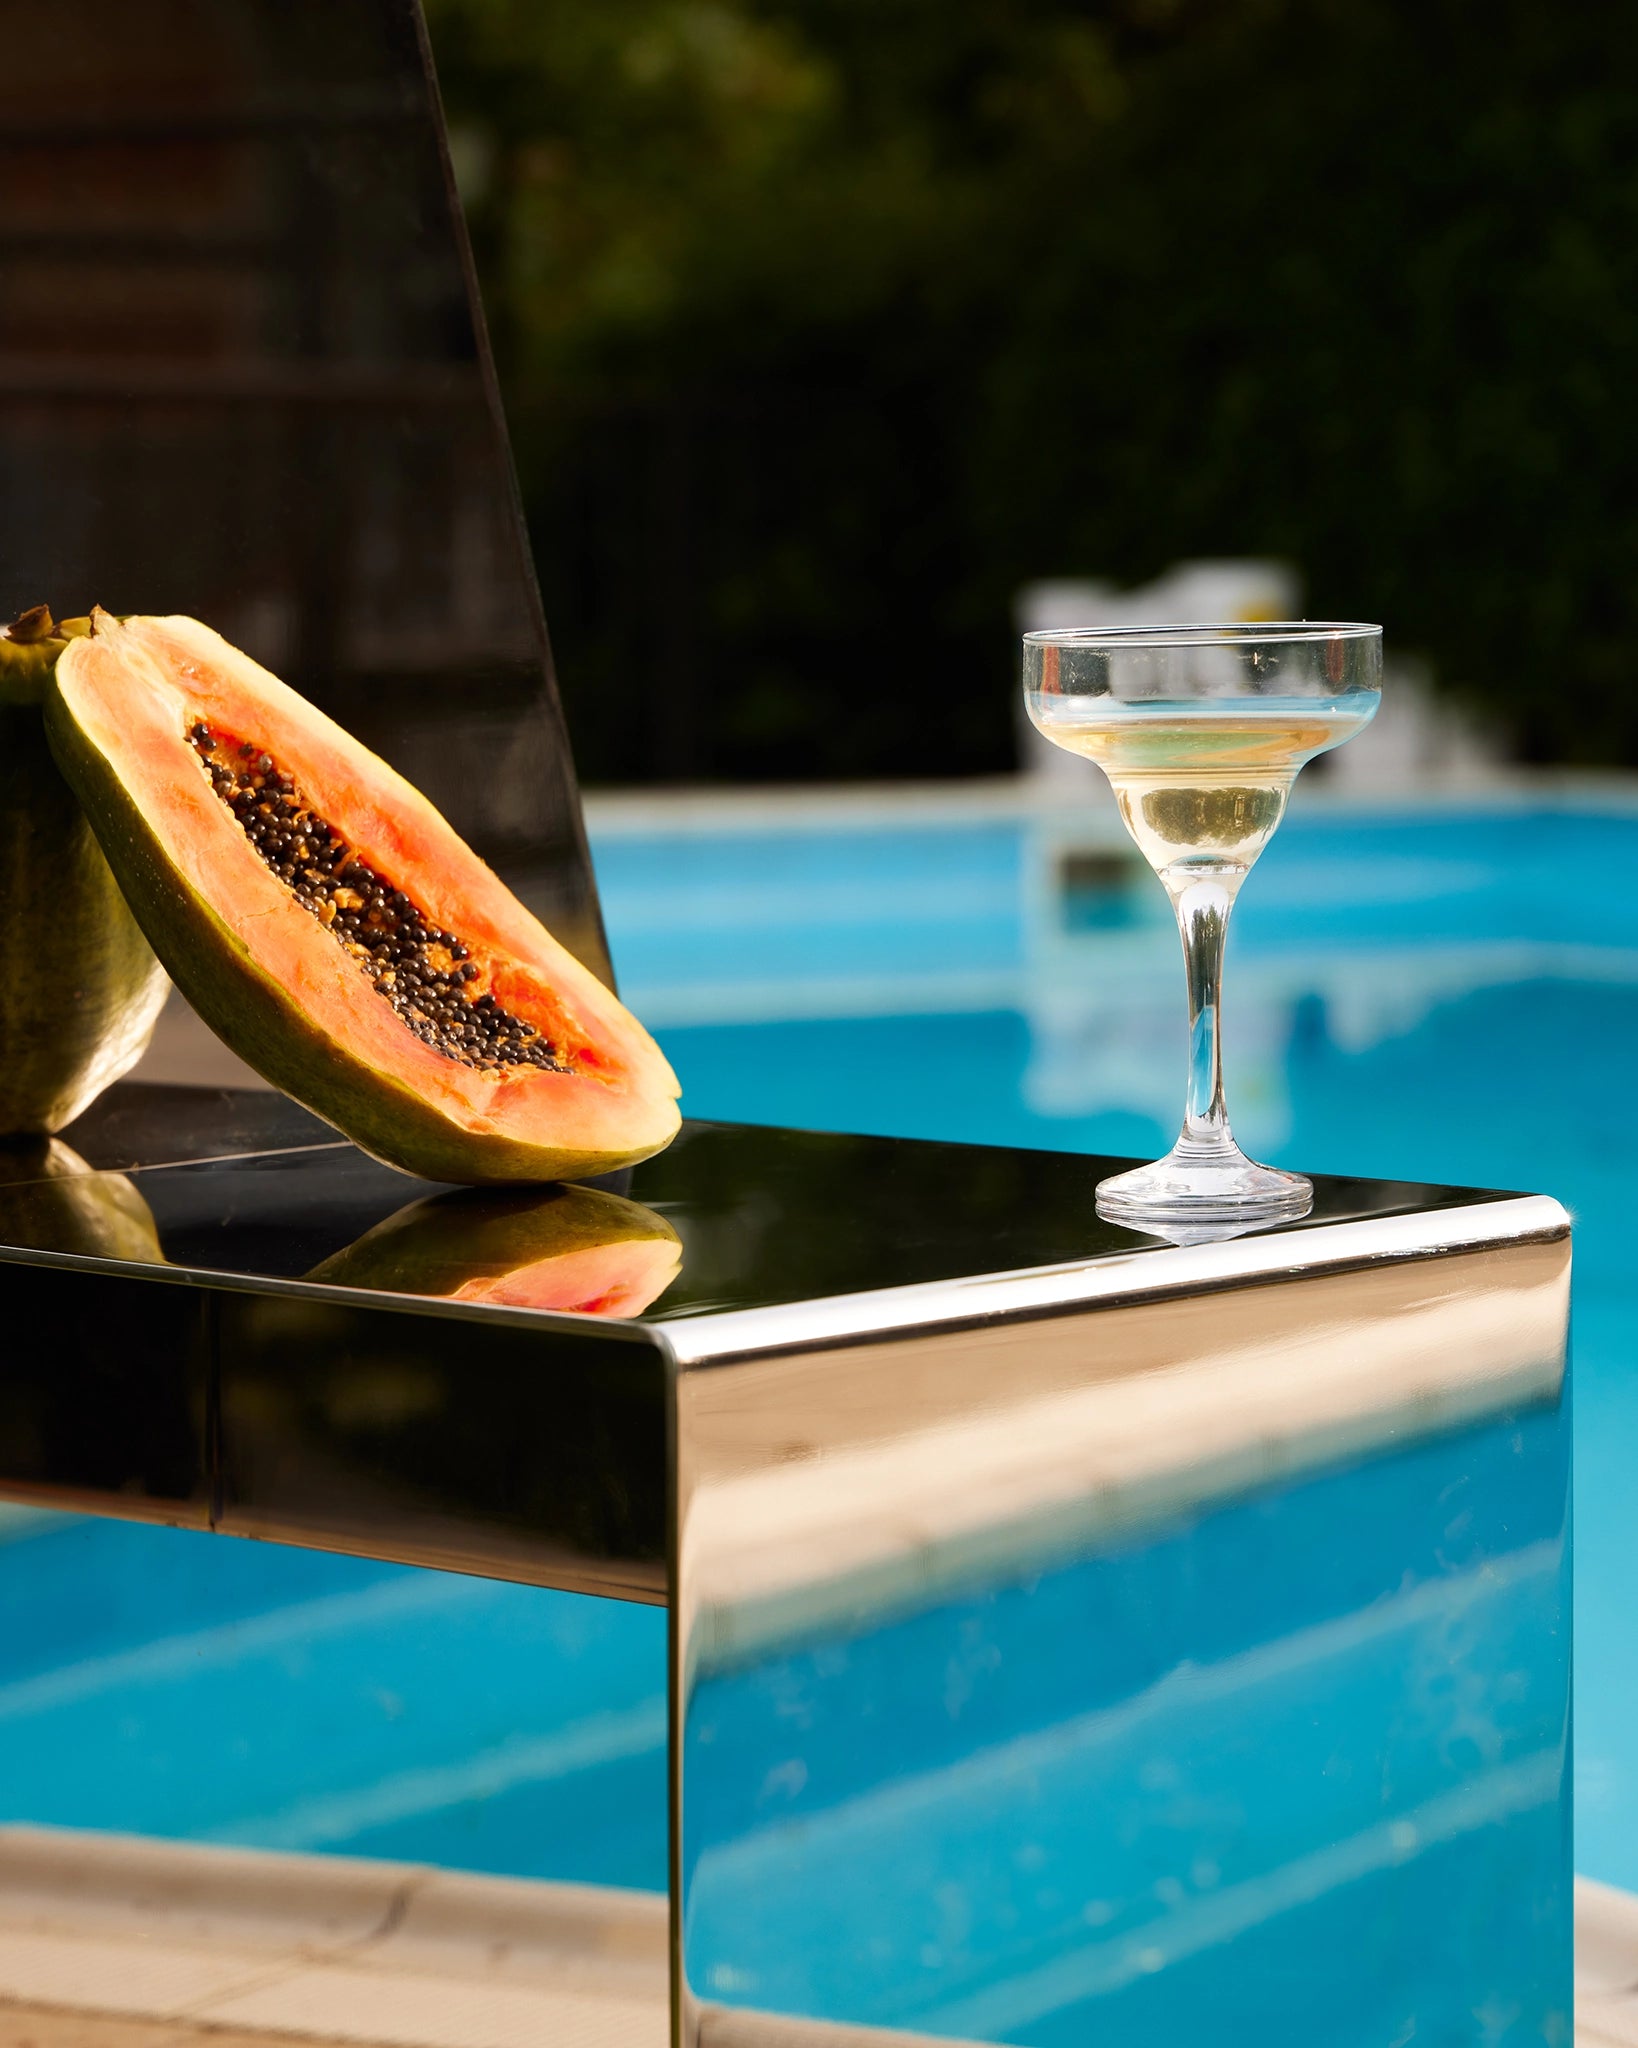 detail of a stainless-steel mirror chair with mesoamerican temple-like shape, in a summer setting on a poolside, with props like a half papaya and a glass of champagne